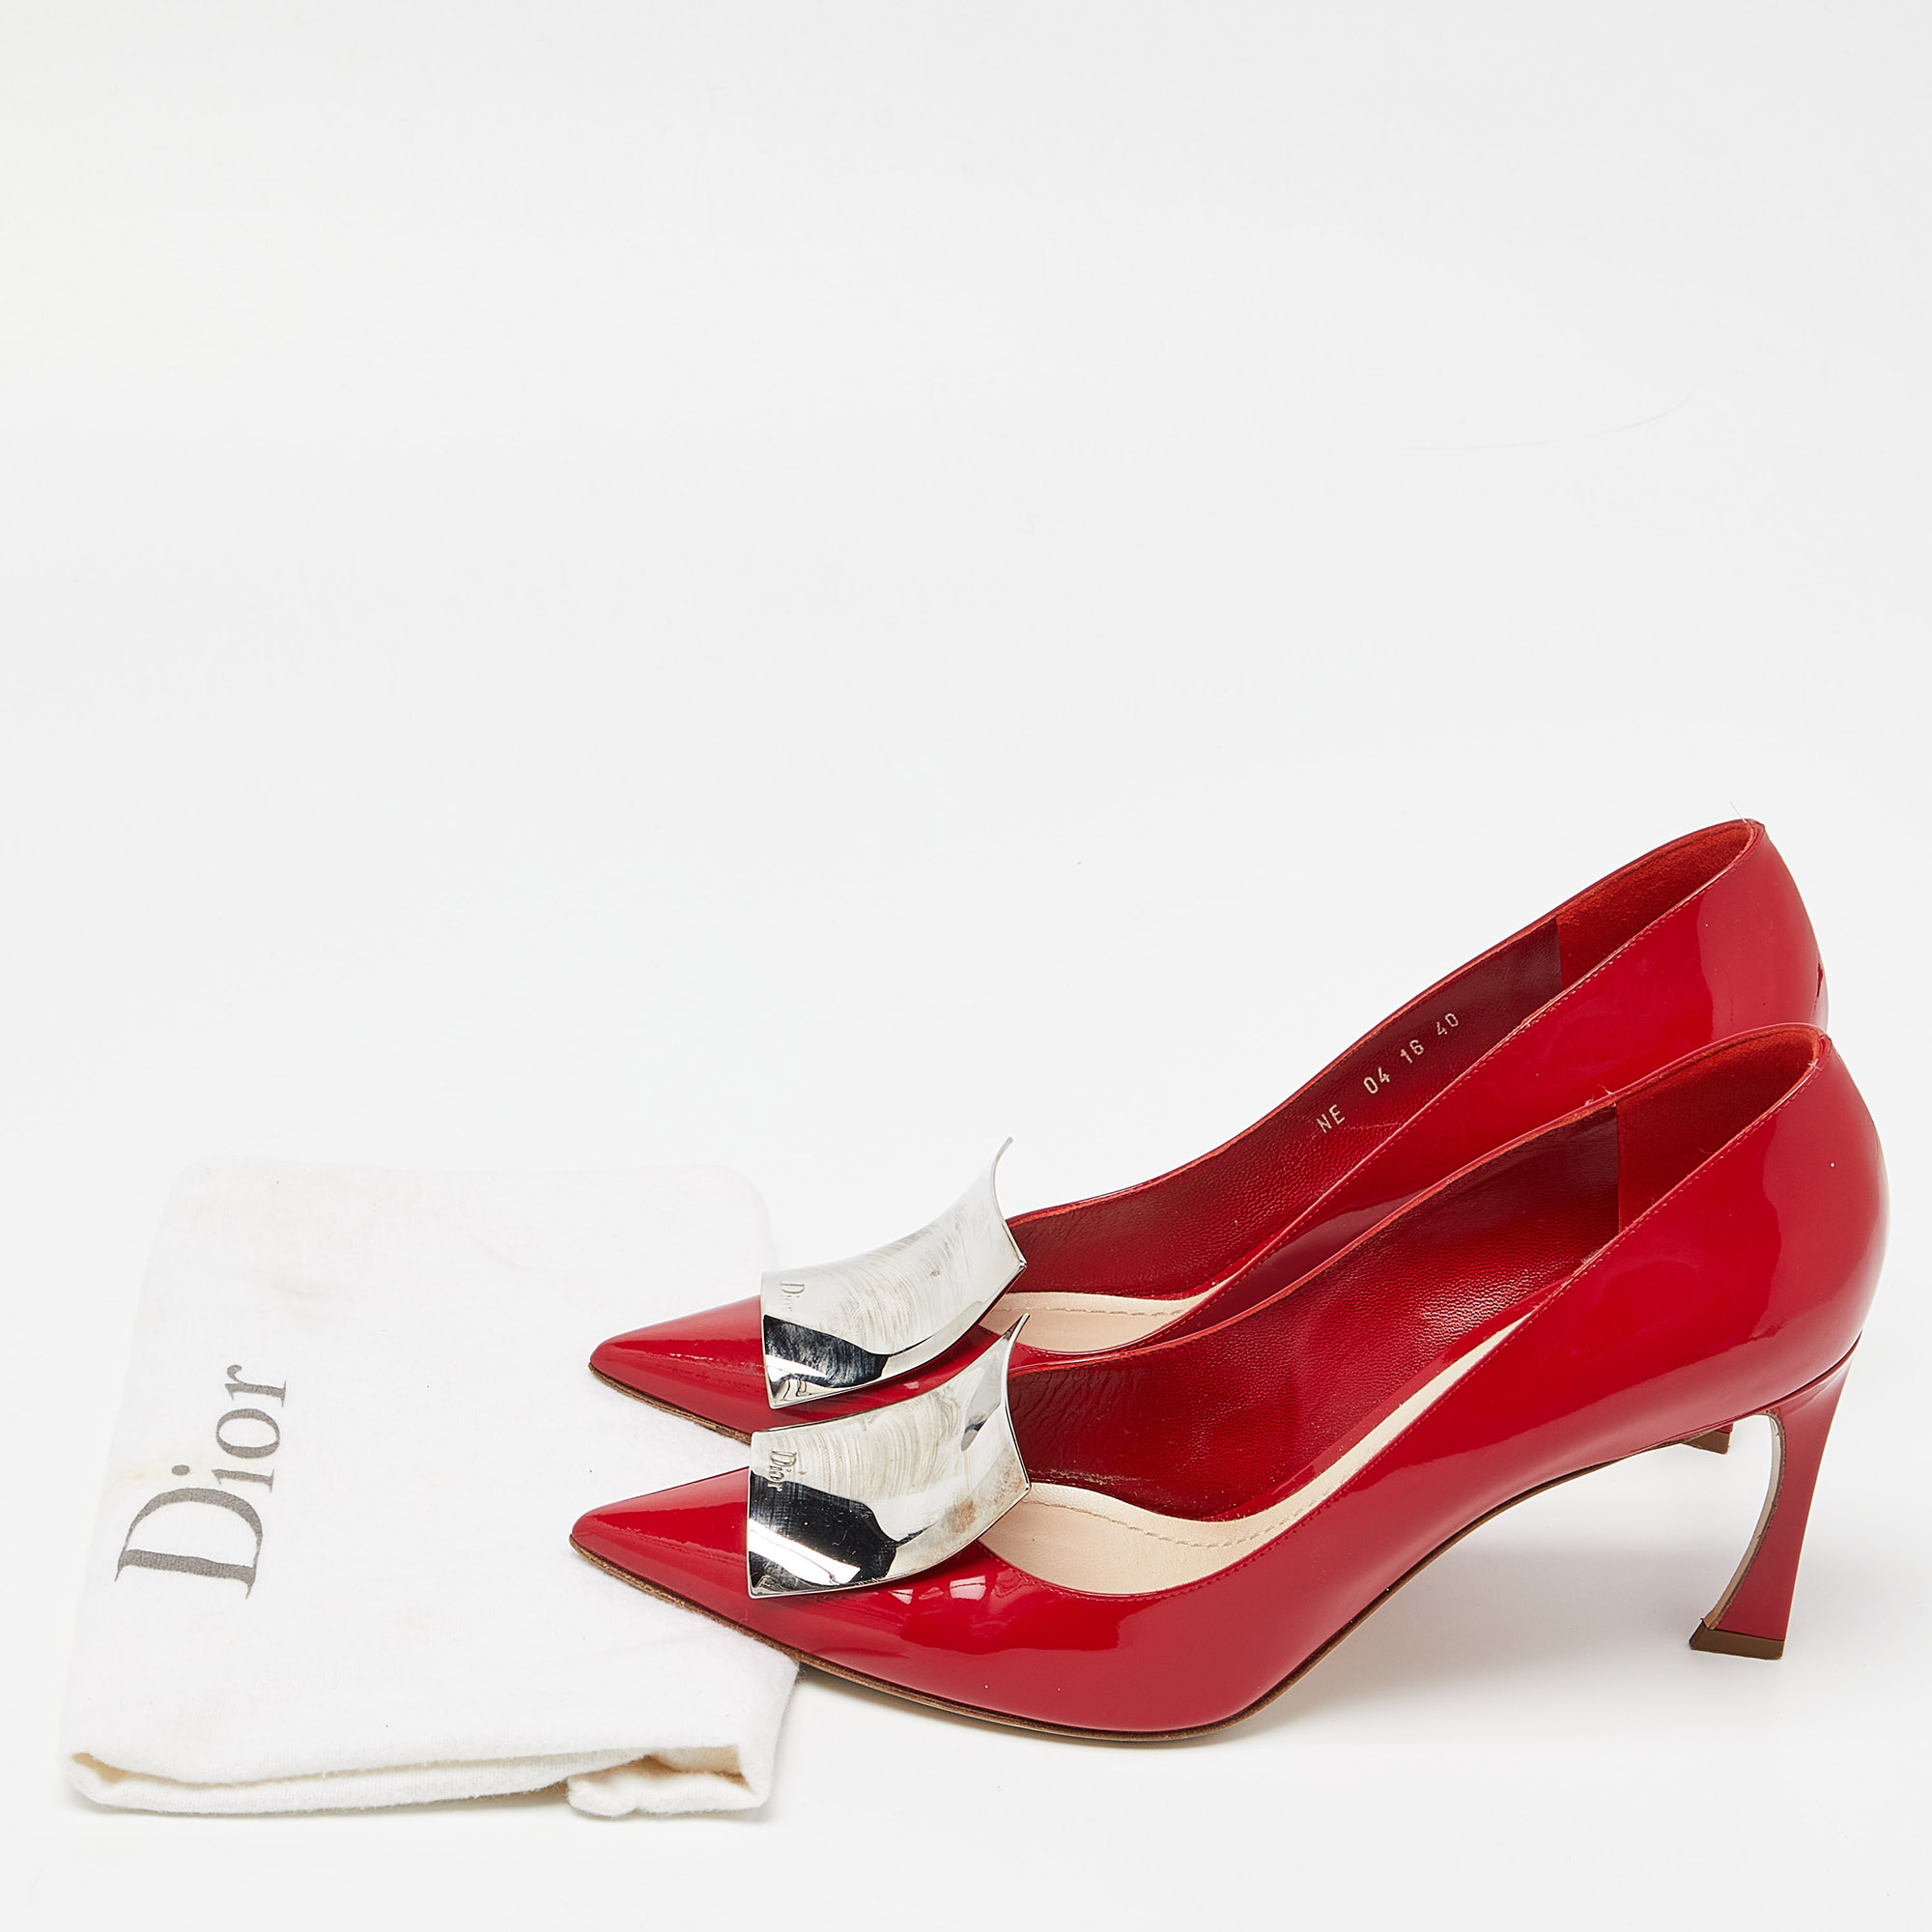 Dior Red Patent Leather Metal Pointed Toe Pumps Size 40